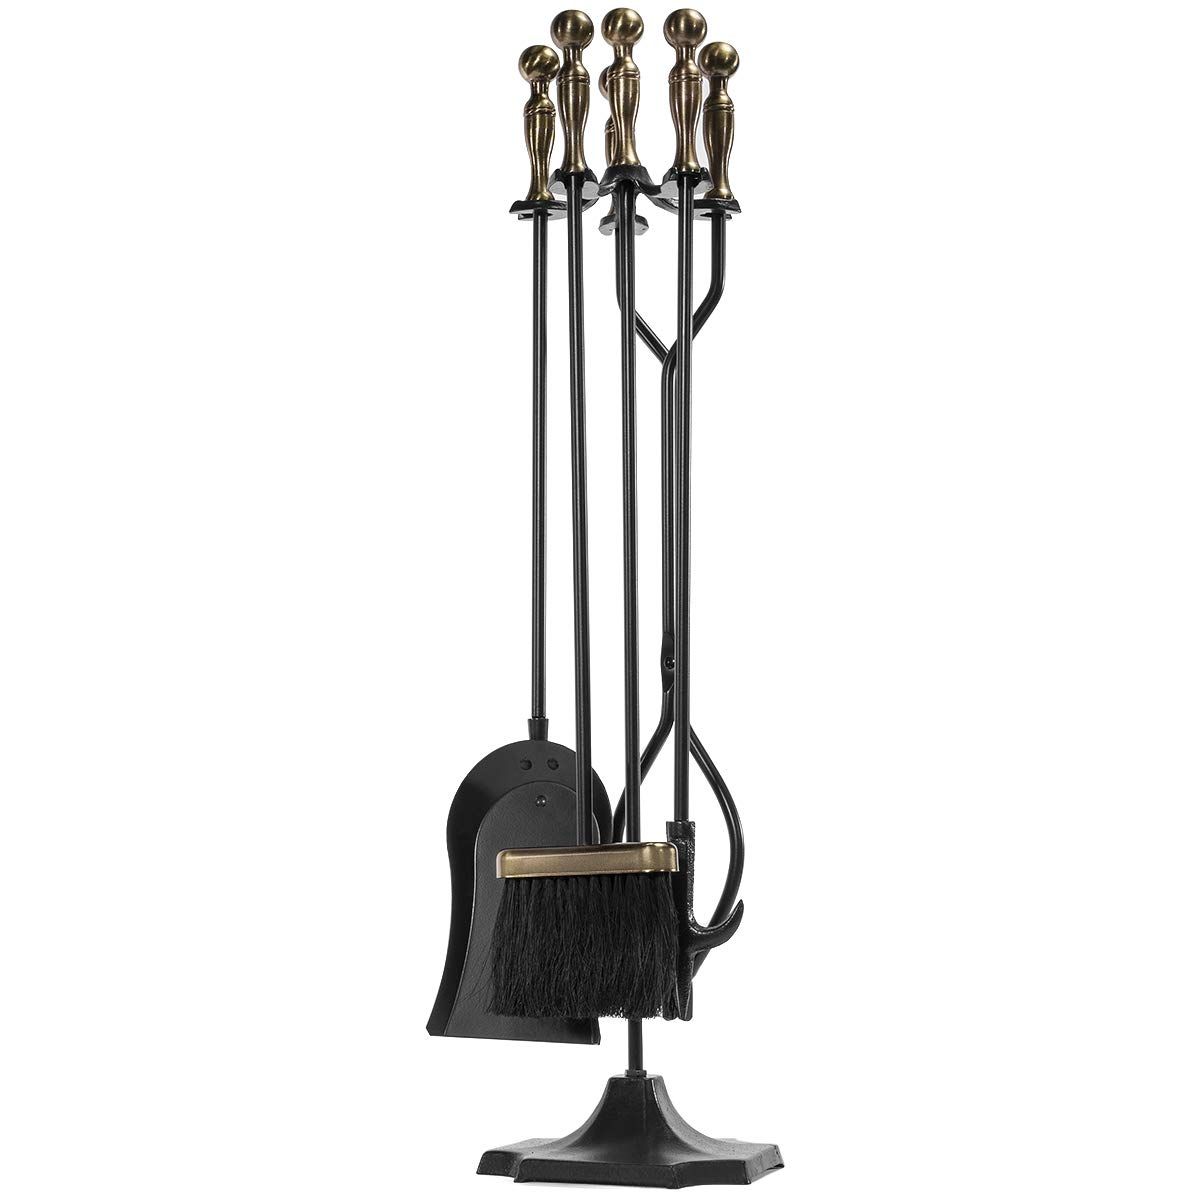 Barton 5Pc Fireplace Tools Bronze w/Stand Poker Shovel Tongs Brush Fire Set Accessories Indoor Outdo | Amazon (US)